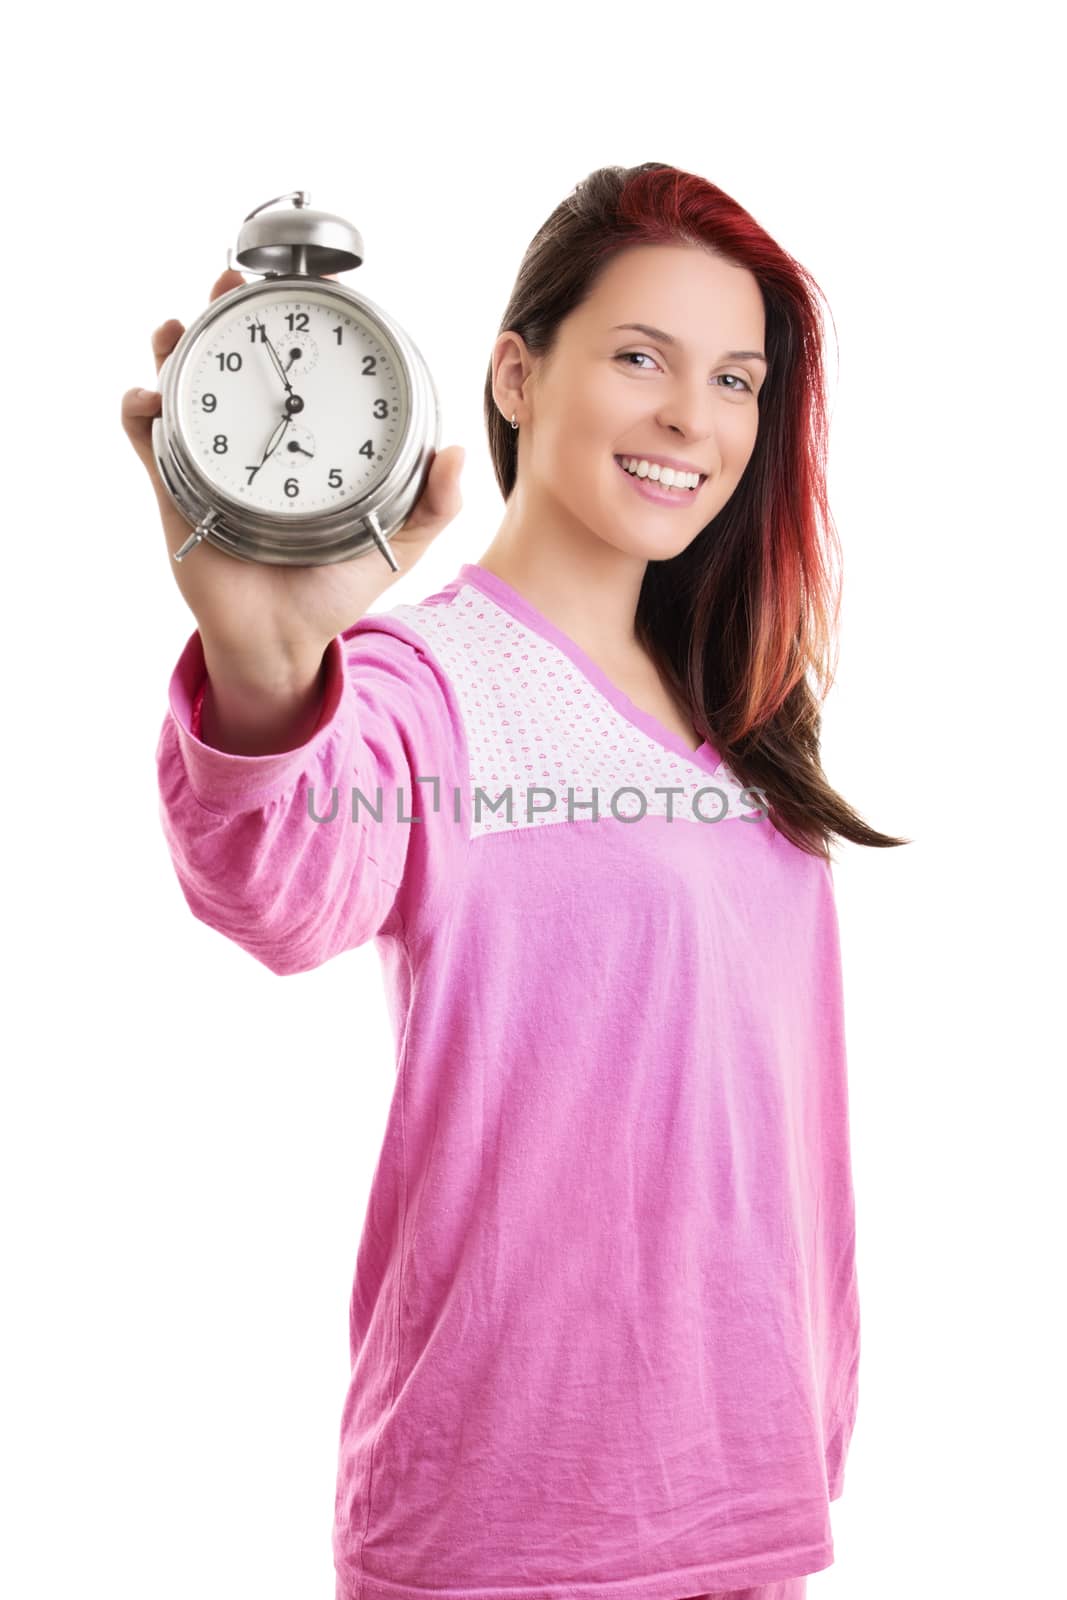 Early morning concept. Beautiful young woman in pink pajamas smiling widely and holding an old fashioned alarm clock, isolated on white background.